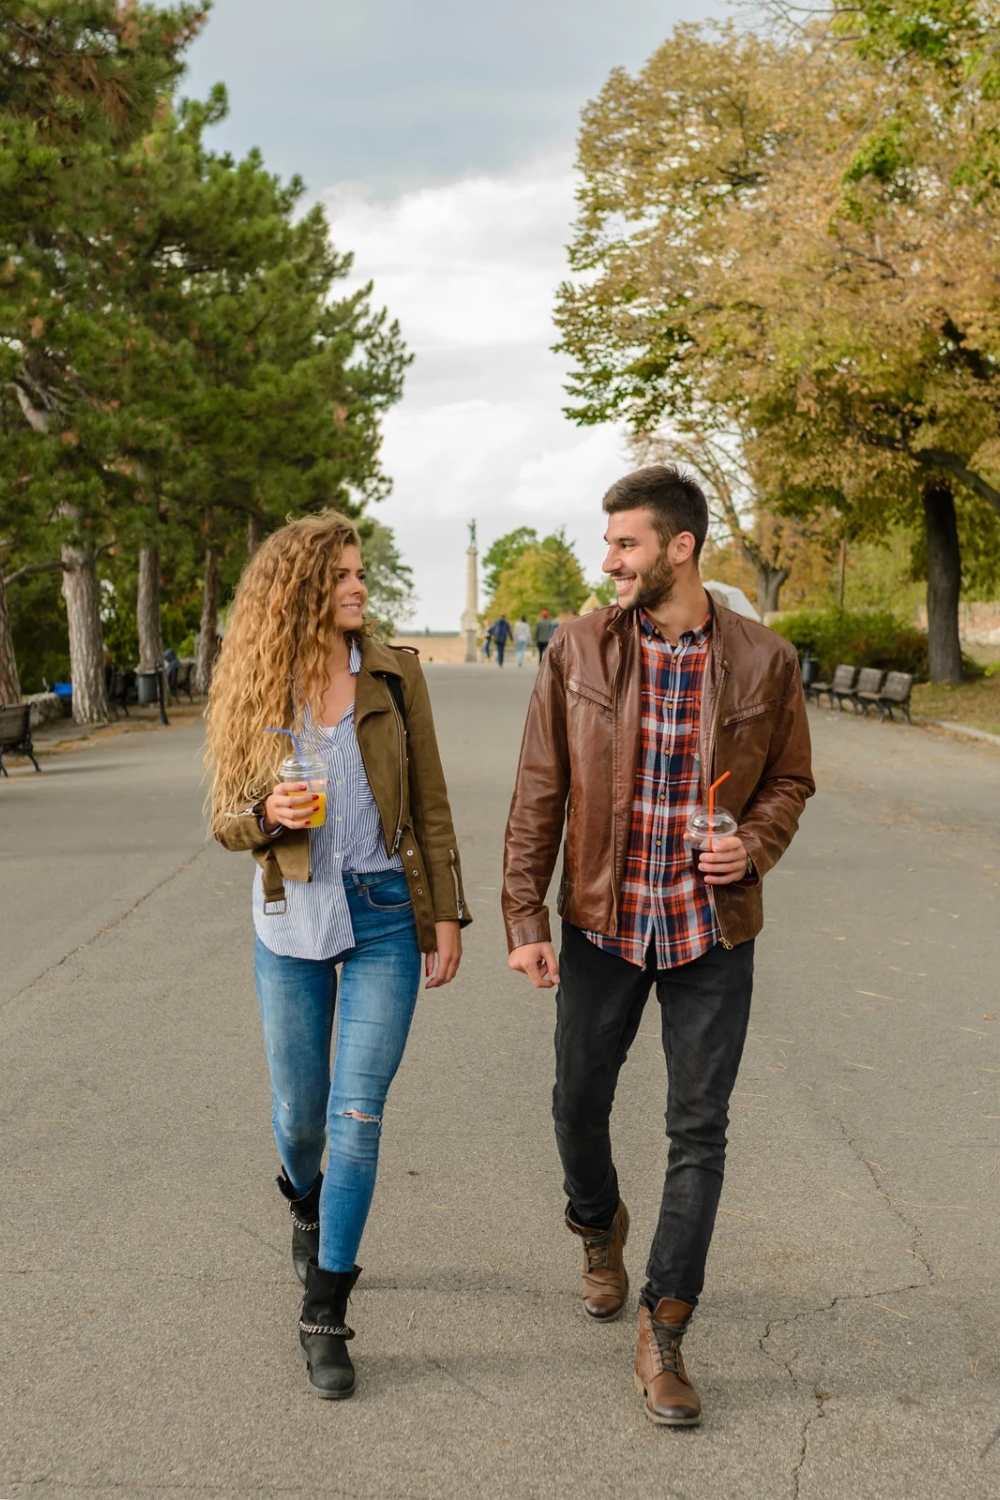 13 Signs a guy is seriously interested in you